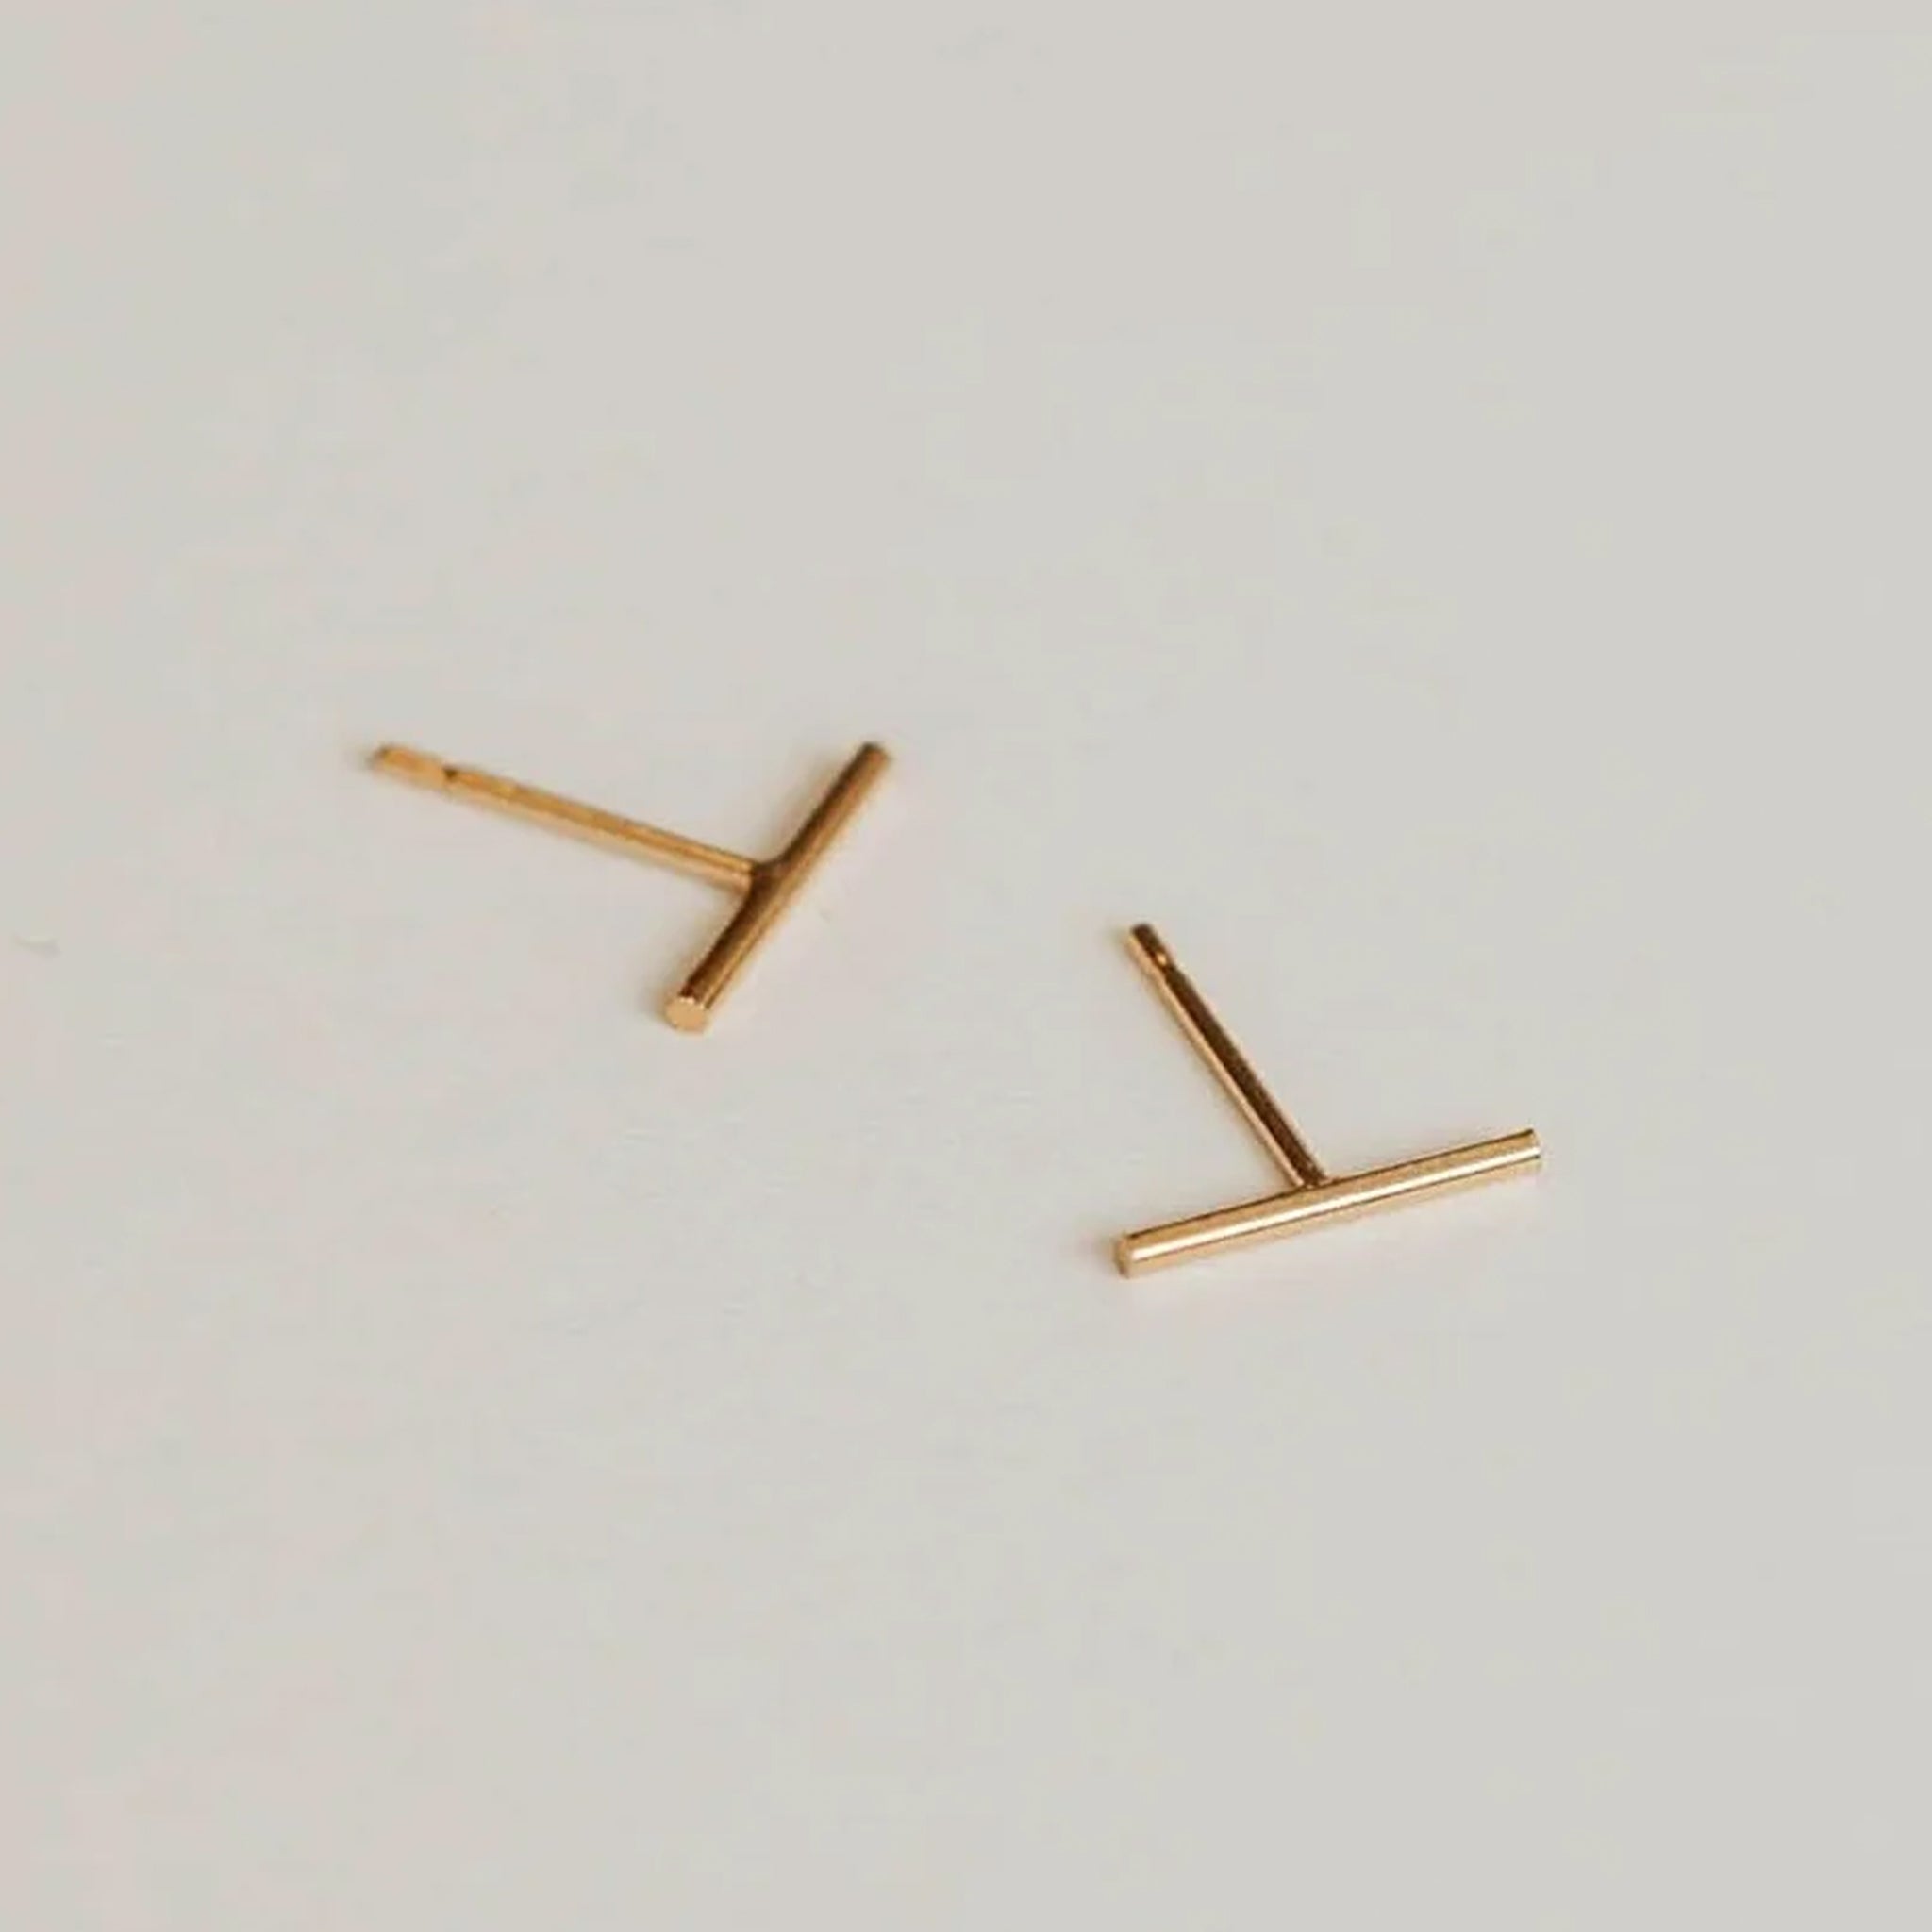 On a grey background is a pair of gold dainty bar stud earring. 